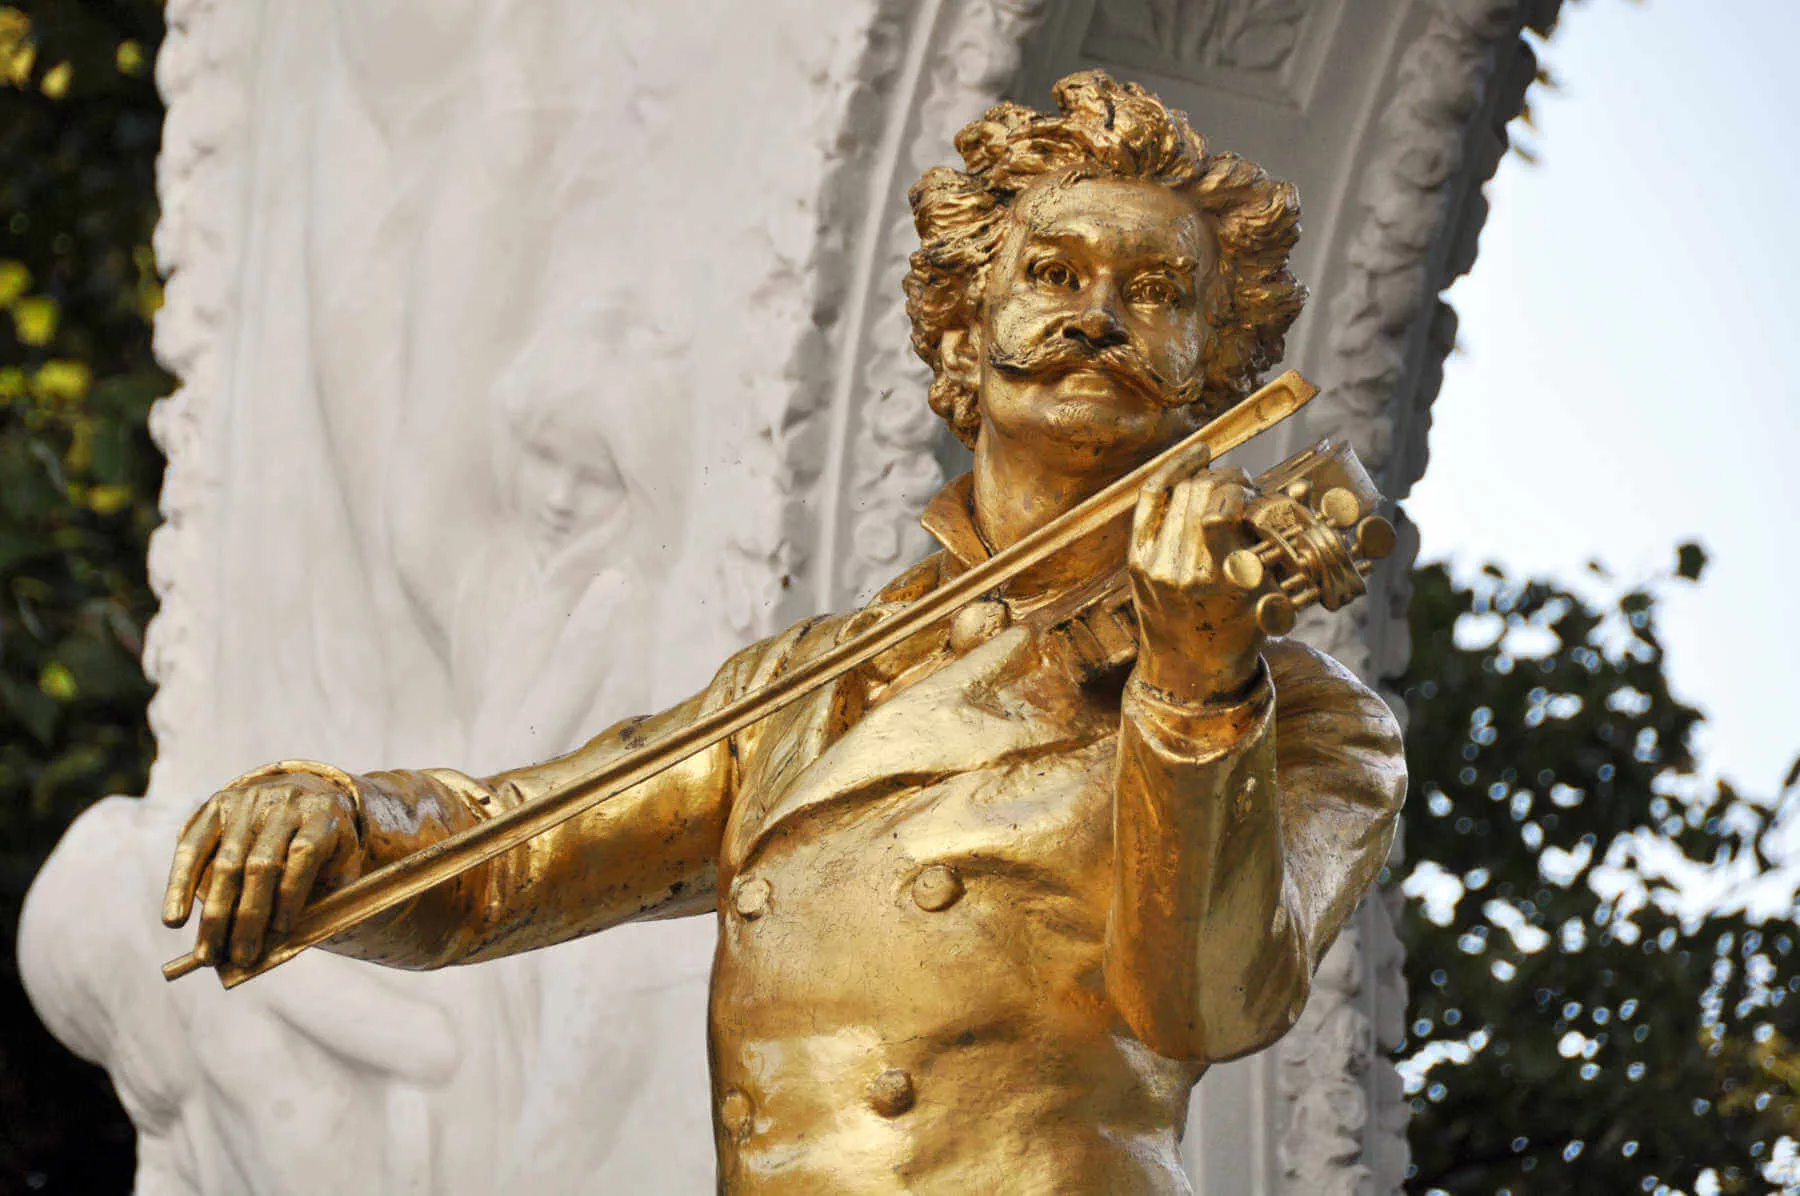 This famous golden statue of Johann Strauss with his violin sits outside the Kursalon in Vienna's City Park